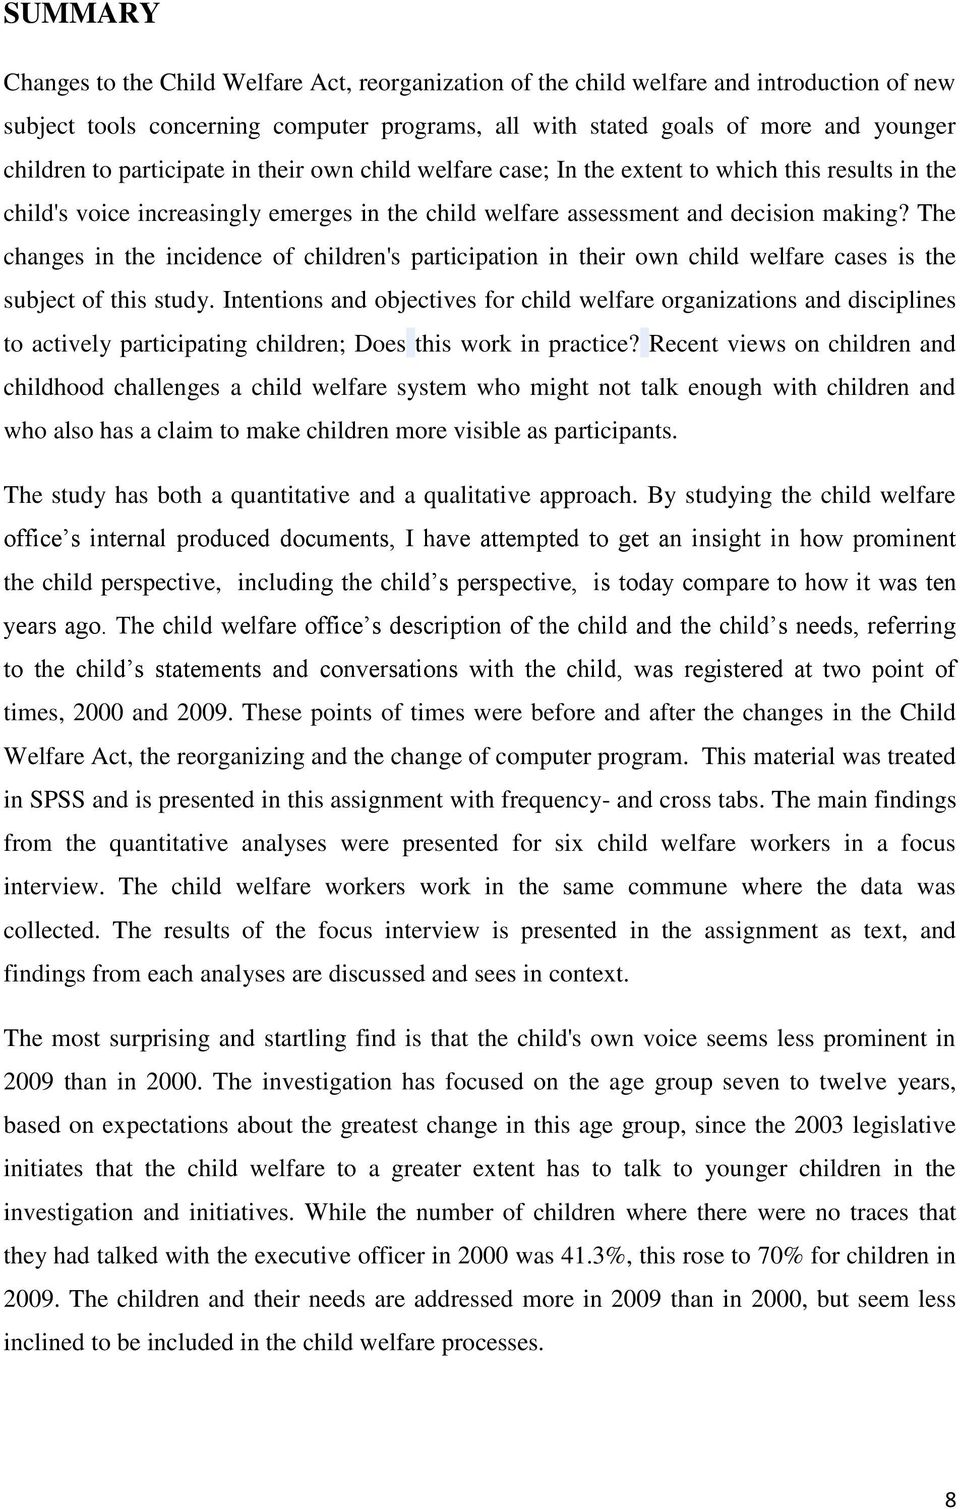 The changes in the incidence of children's participation in their own child welfare cases is the subject of this study.